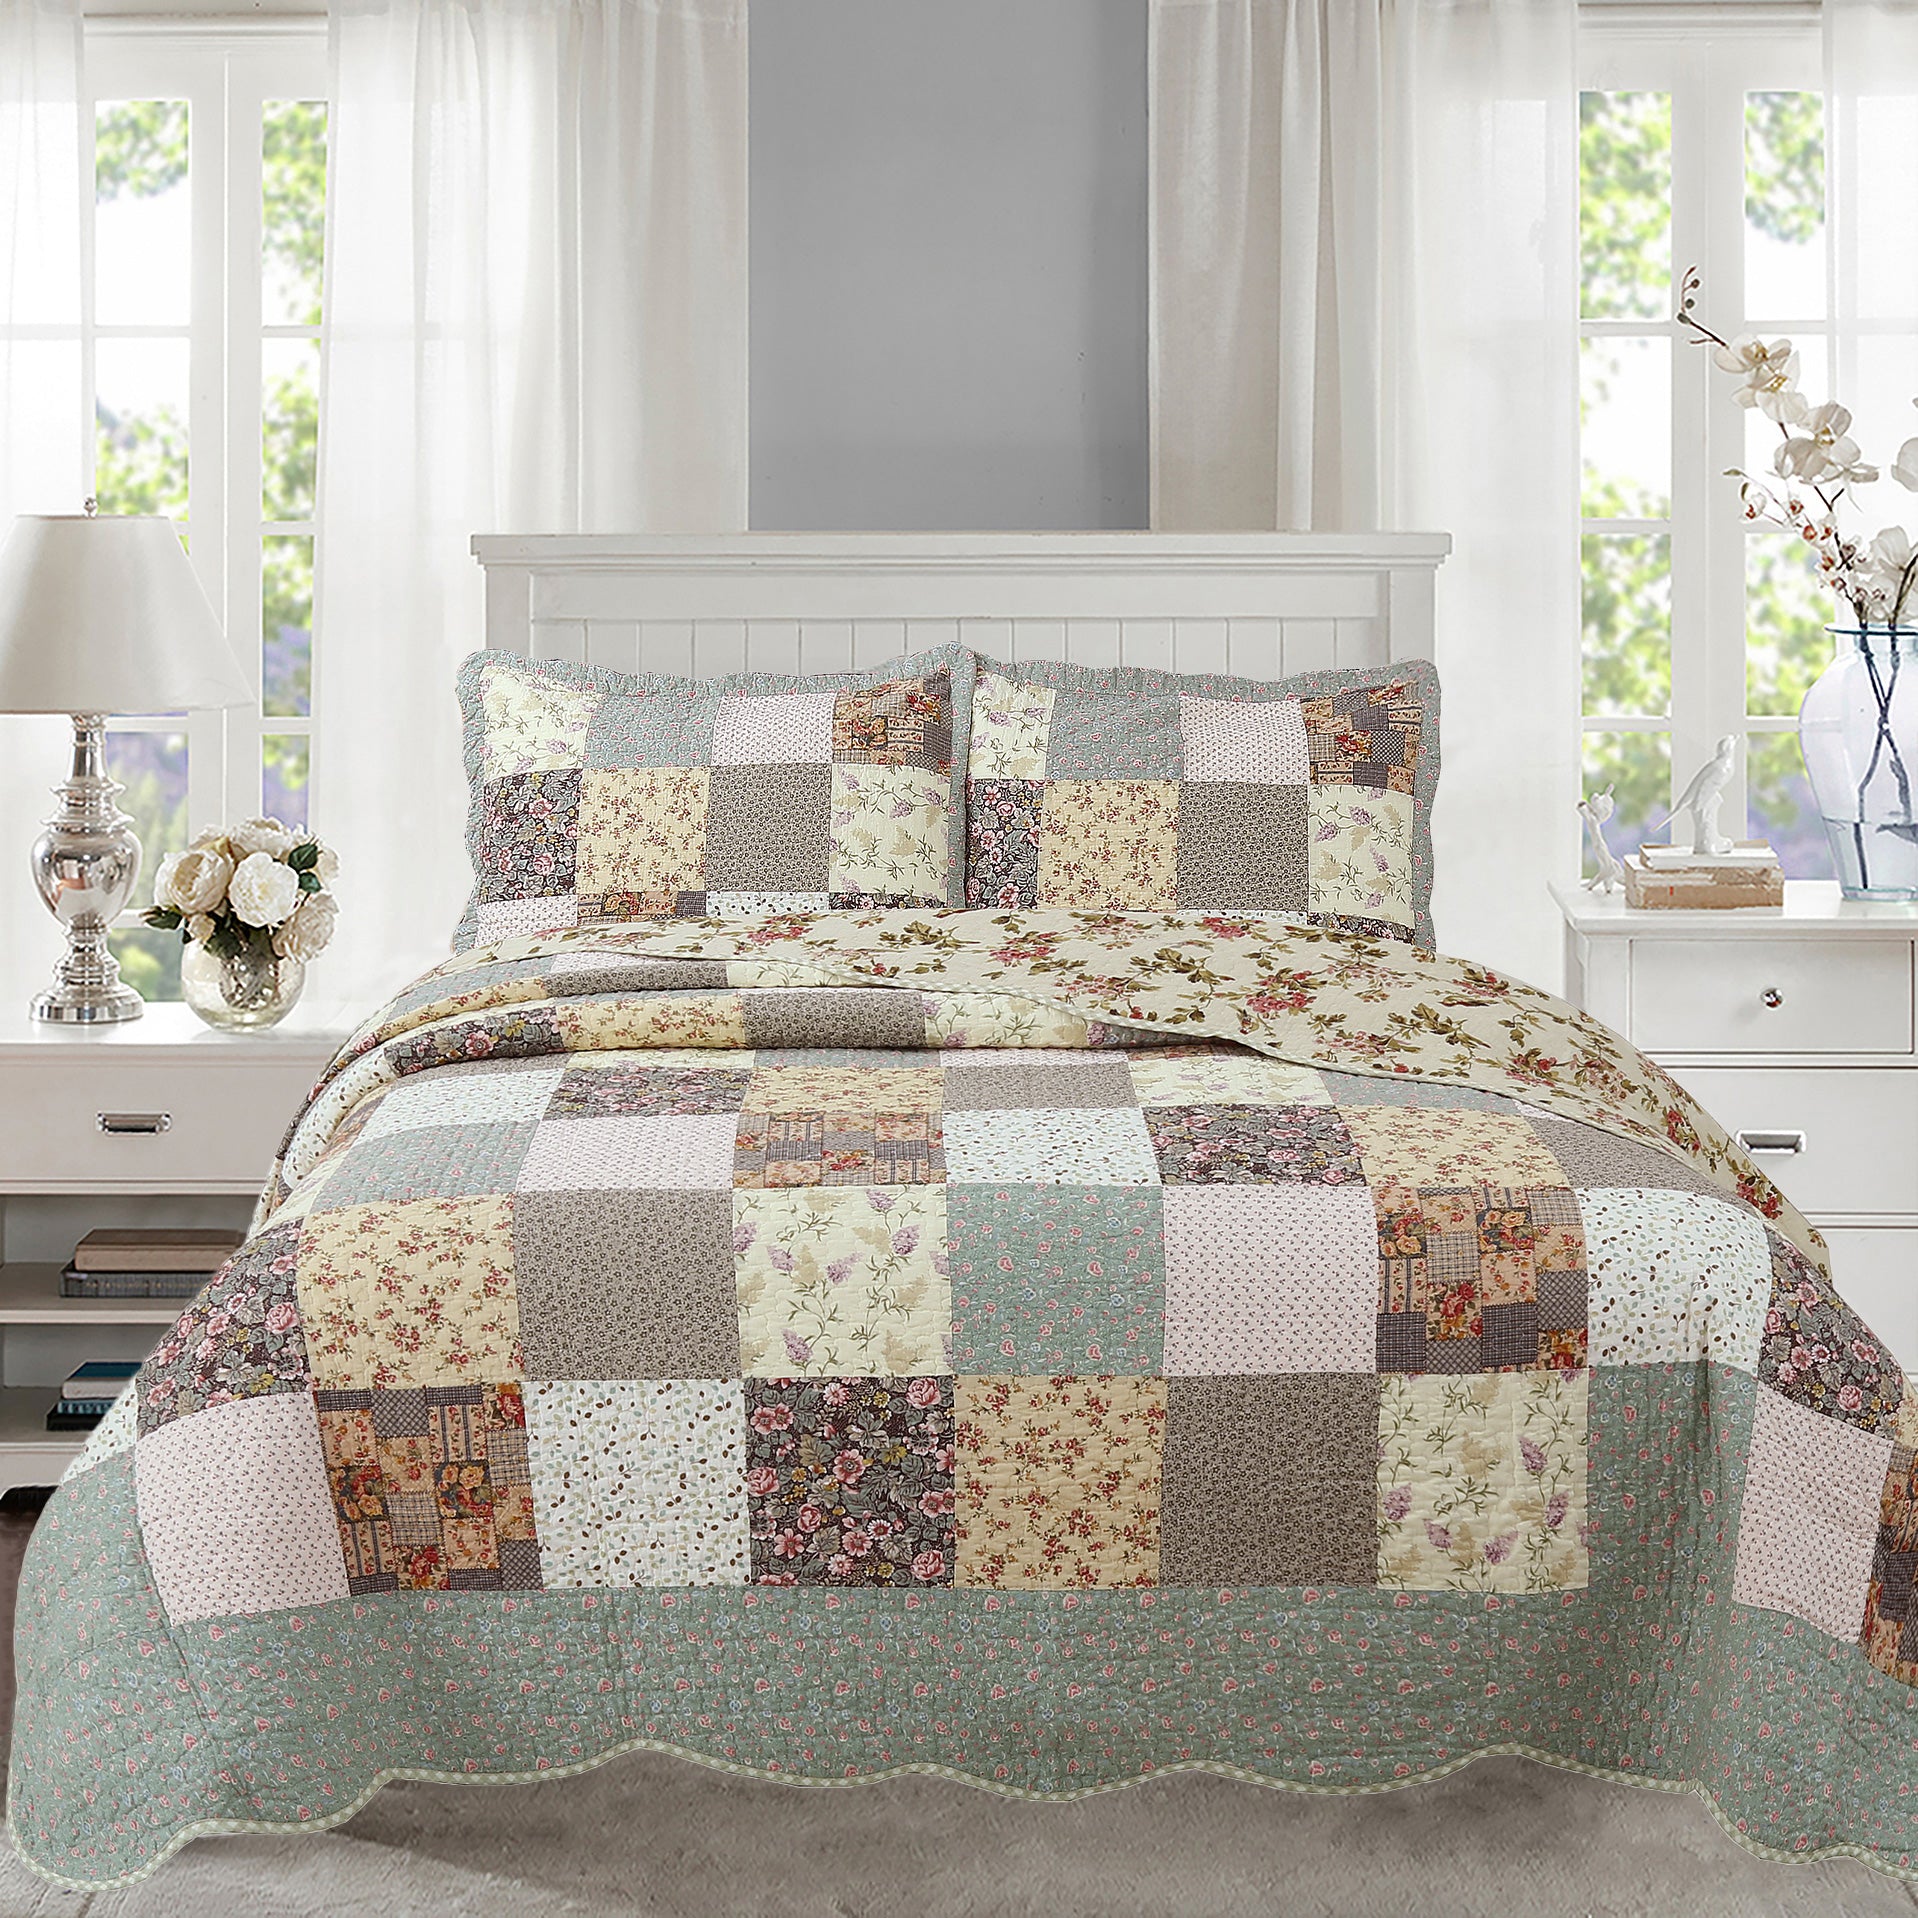 180/180 Cm Quilt, Traditional Quilt, Old-fashioned Quilt in Linen